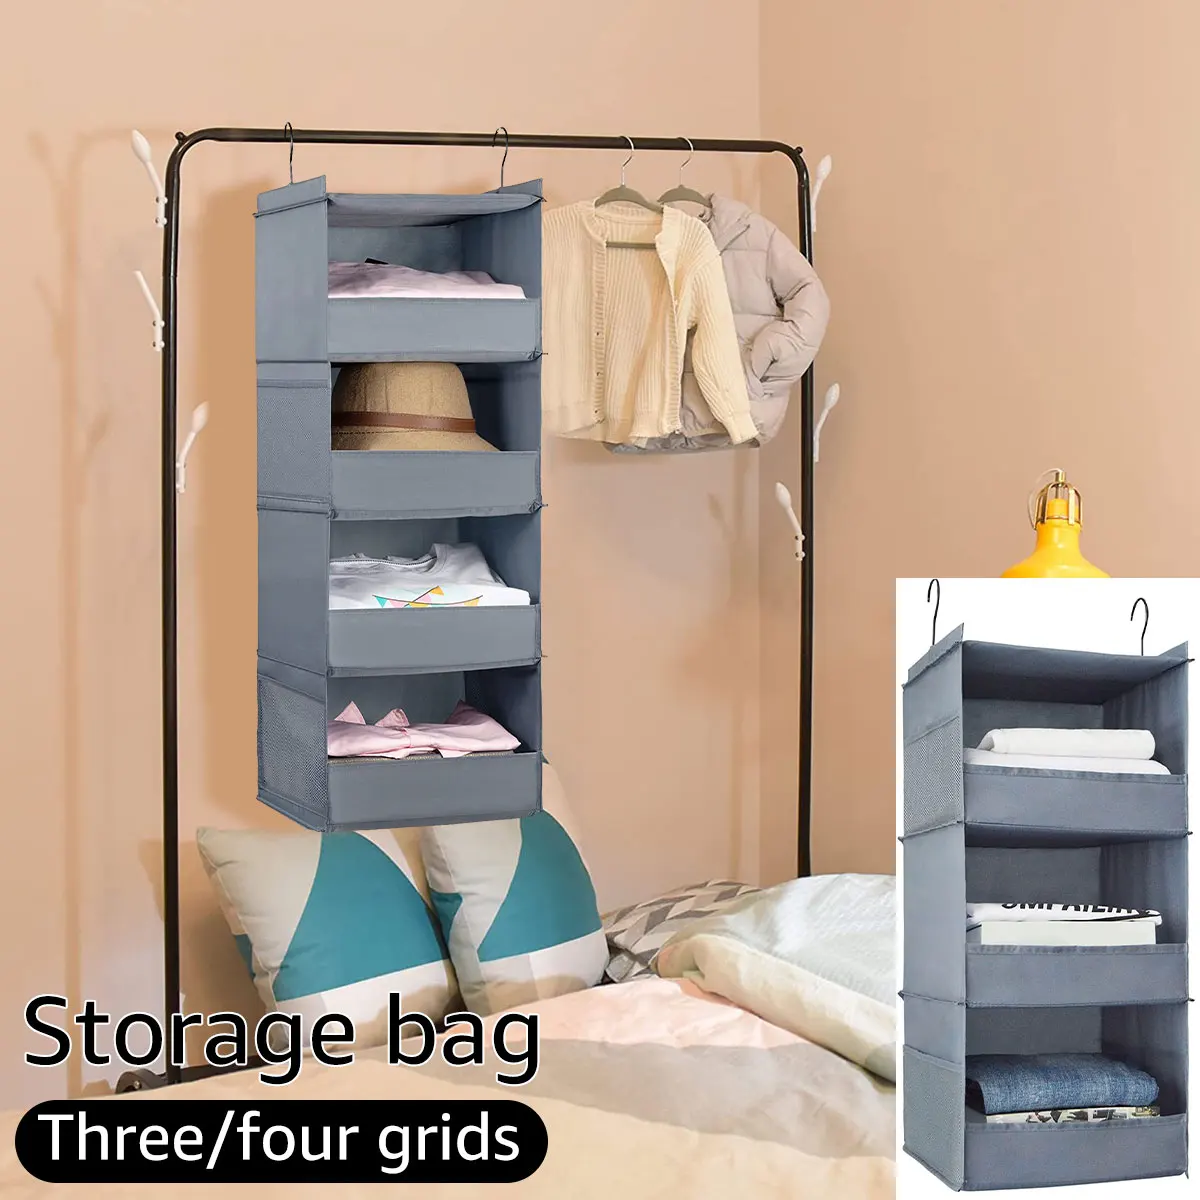 

3/4 Tier Hanging Wardrobe Organizer Collapsible Closet Hanging Shelves with Side Pocket Sturdy Durable Hanging Closet Organizers